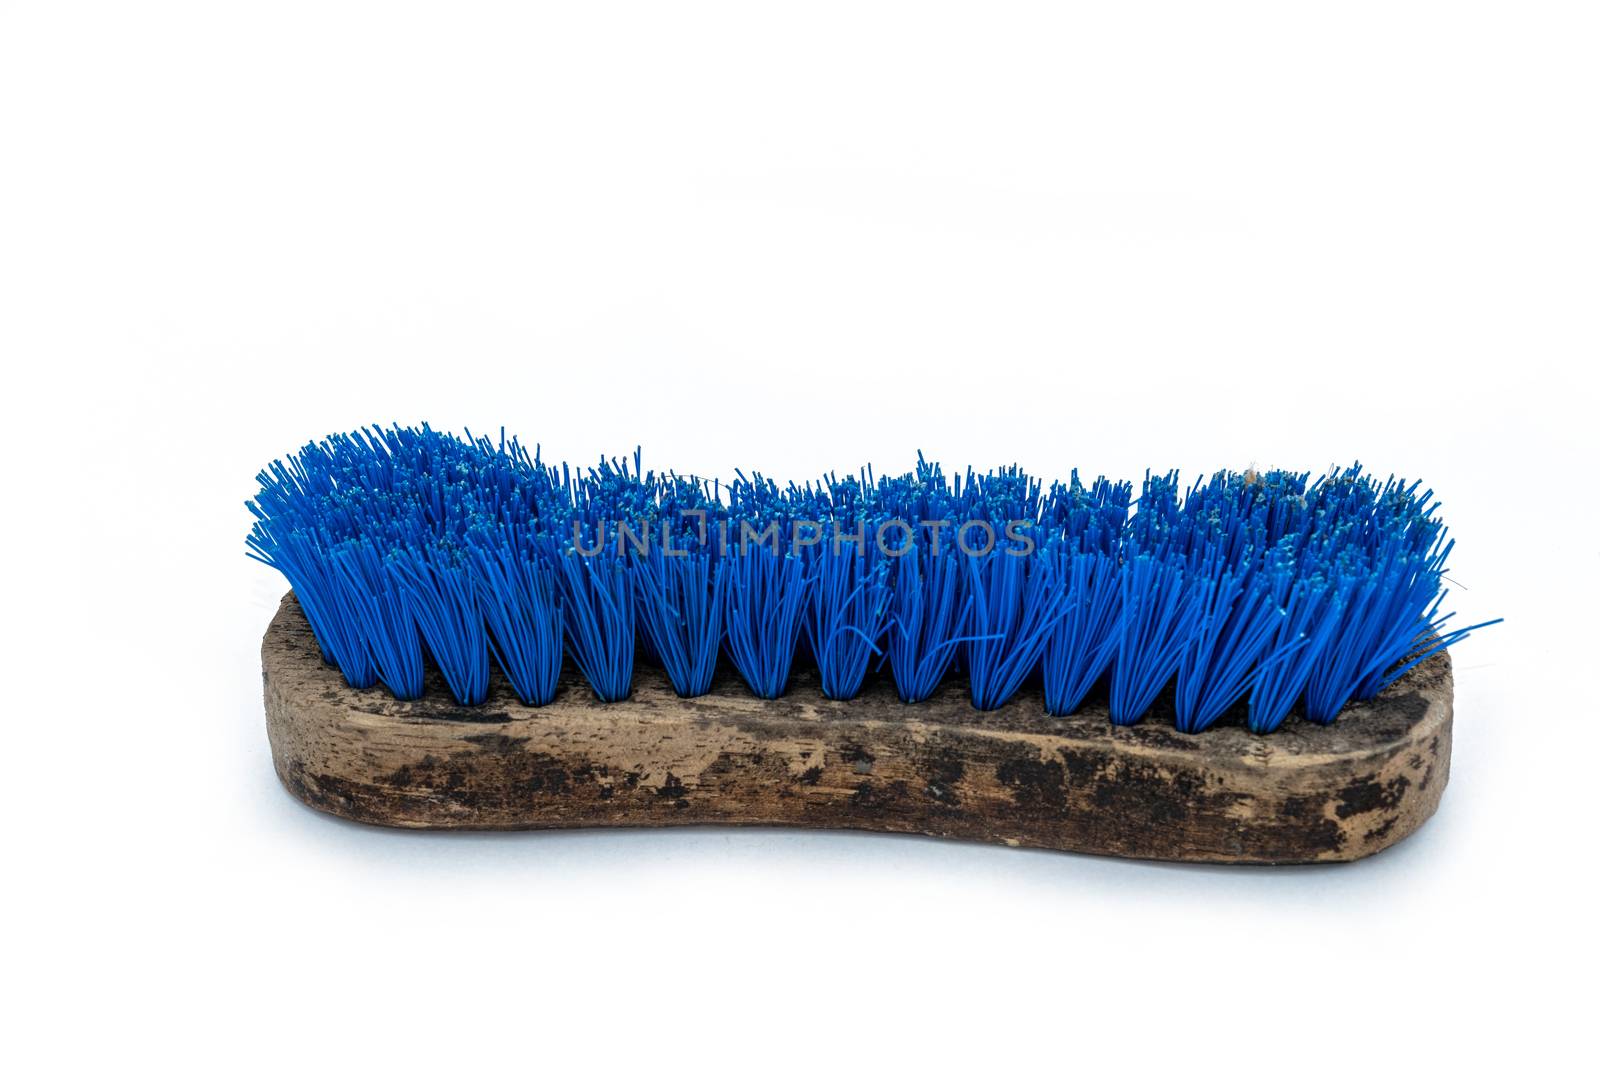 old Blue Washing brush with wooden handle on white background. by peerapixs